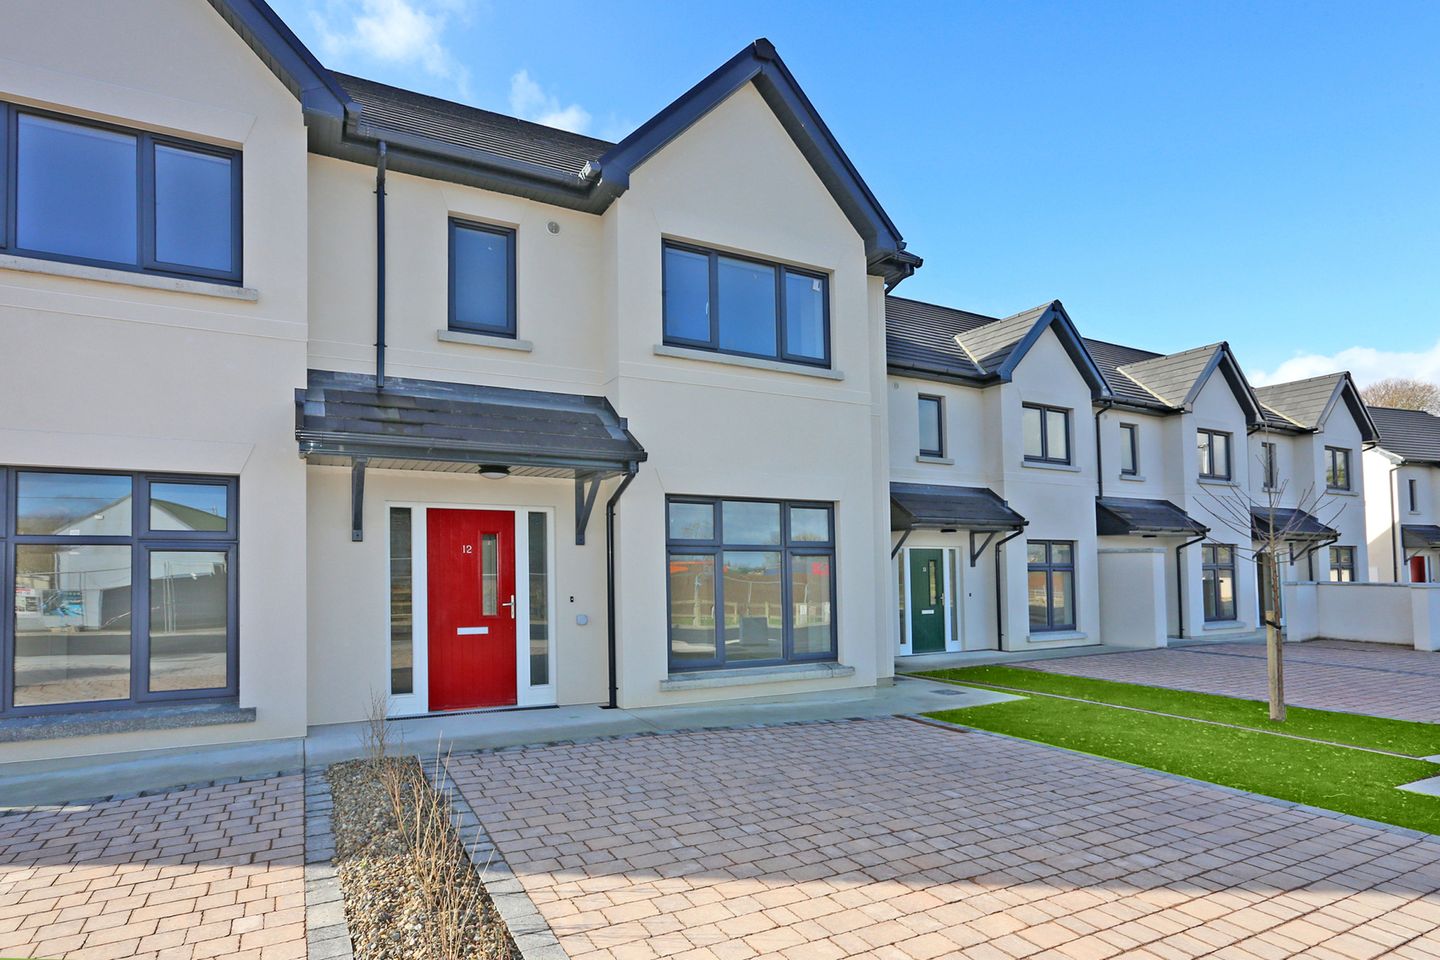 Type G1 - 3 Bed Semi-Detached, An Tobar, Type G1 - 3 Bed Semi-Detached, An Tobar, Patrickswell, Co. Limerick